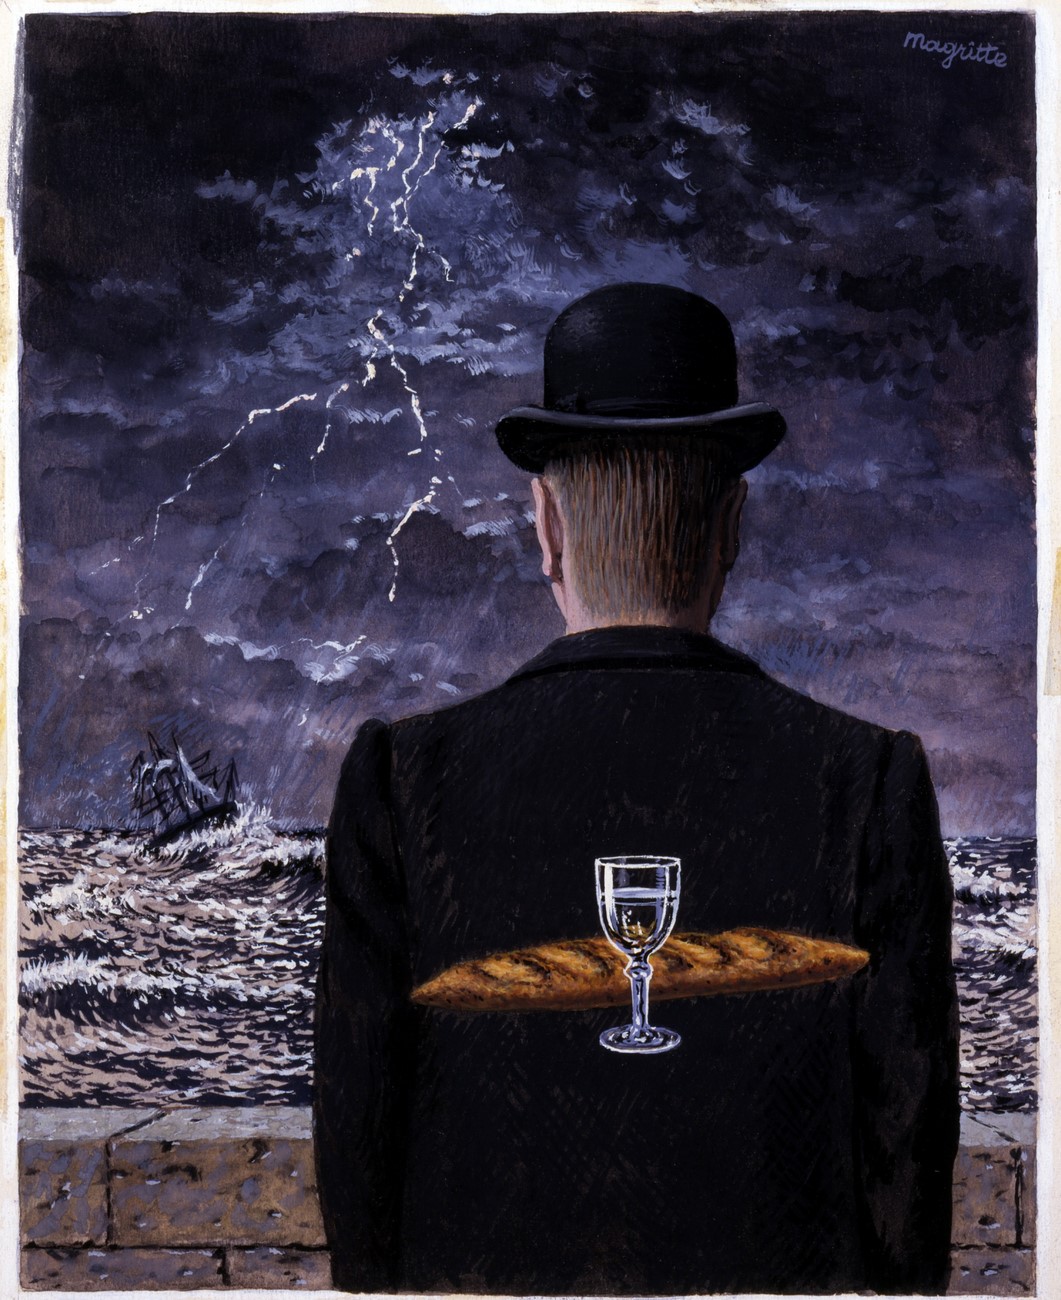 Fig. 11 – René Magritte, “Though all the winds of doctrine were let loose to play upon the earth, so truth be in the field, we do ingloriously, to misdoubt her strength. Let her and falsehood grapple; who ever knew truth put to the worse in a free and open encounter?” – John Milton Areopagítica, 1644; From the series: Great Ideas of Western Man ca., 1962; 1958, gouache on paper mounted on paperboard, 23.4 x 19.0 cm, Smithsonian American Art Museum, Gift of Container Corporation of America, 1984.124.195 .